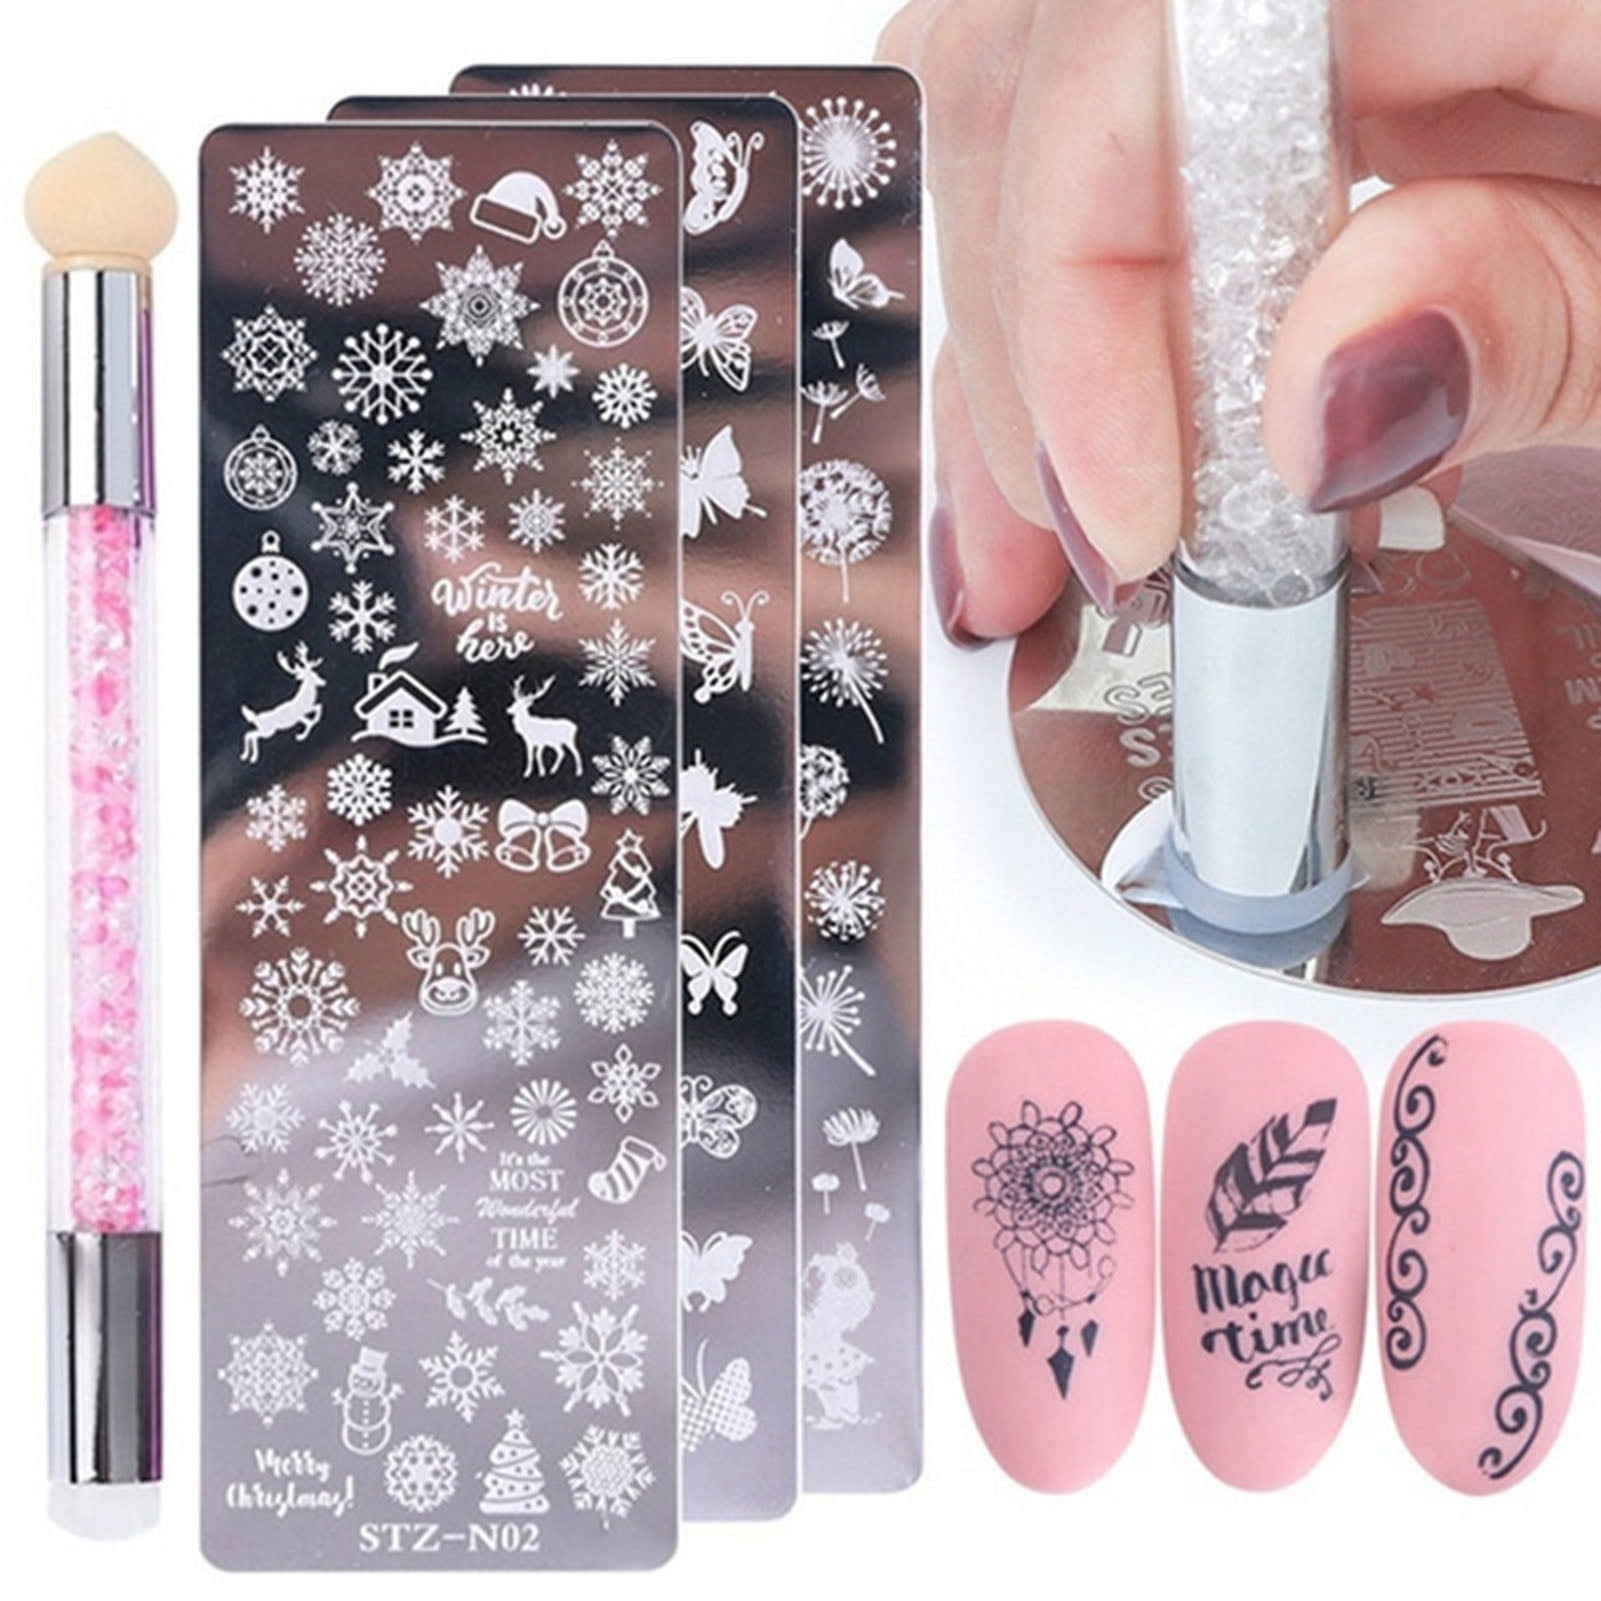 Nail Art Silicone Pen Acrylic Double Head Silicone Pen Embossing